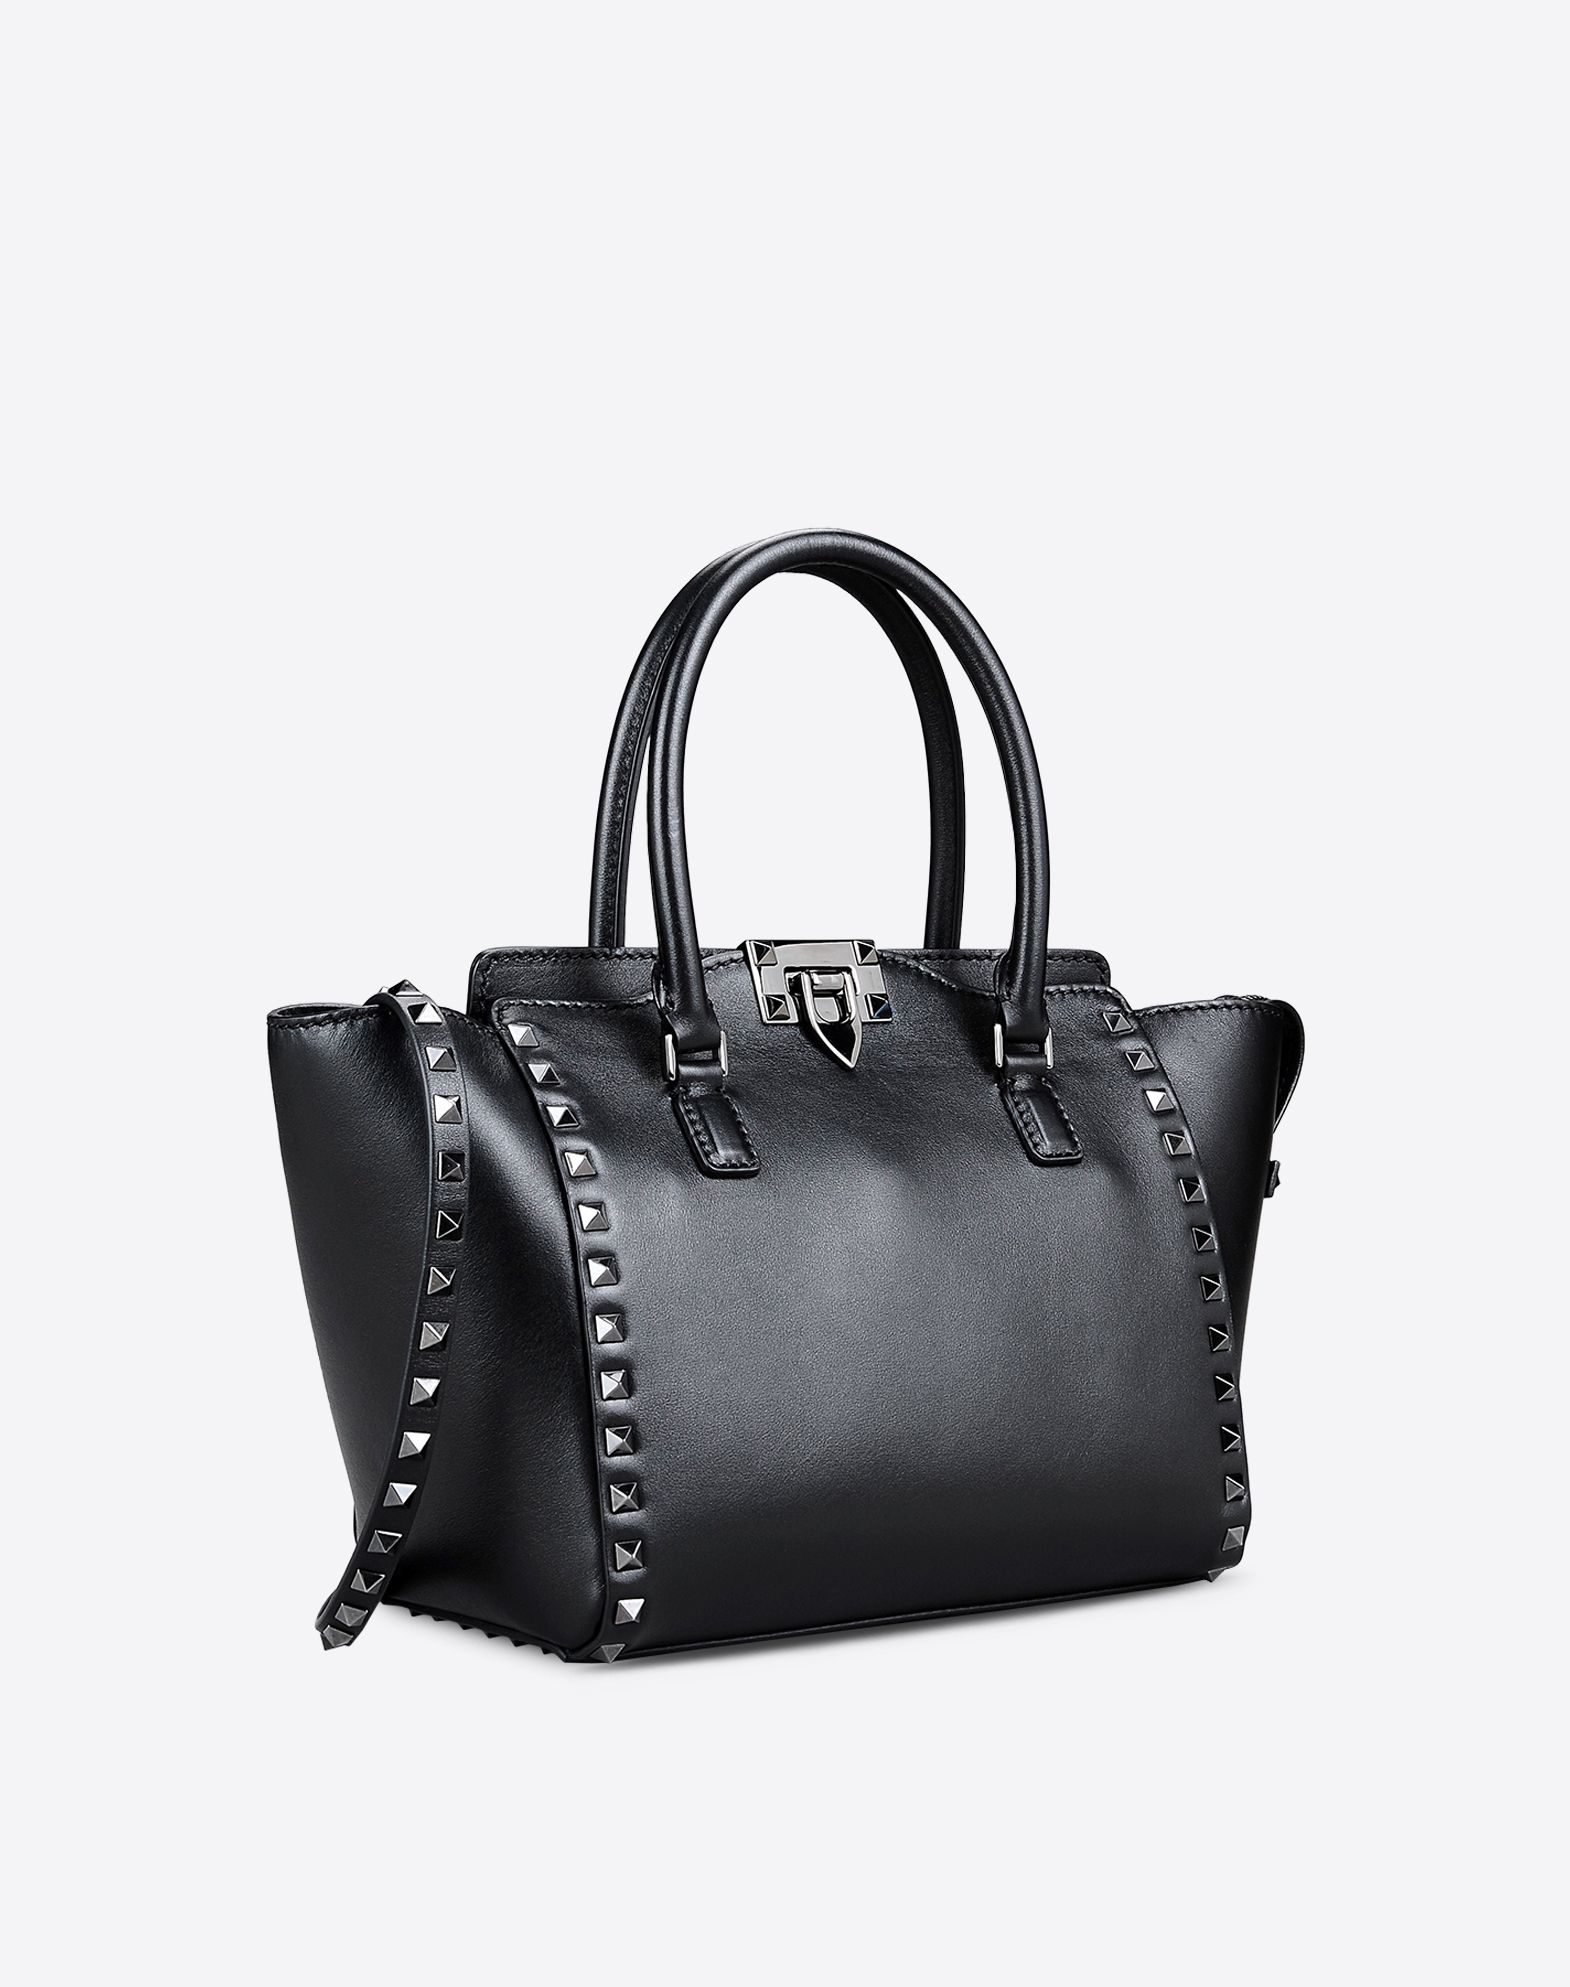 Valentino Rockstud Small Double Handle Bag in Black | Lyst